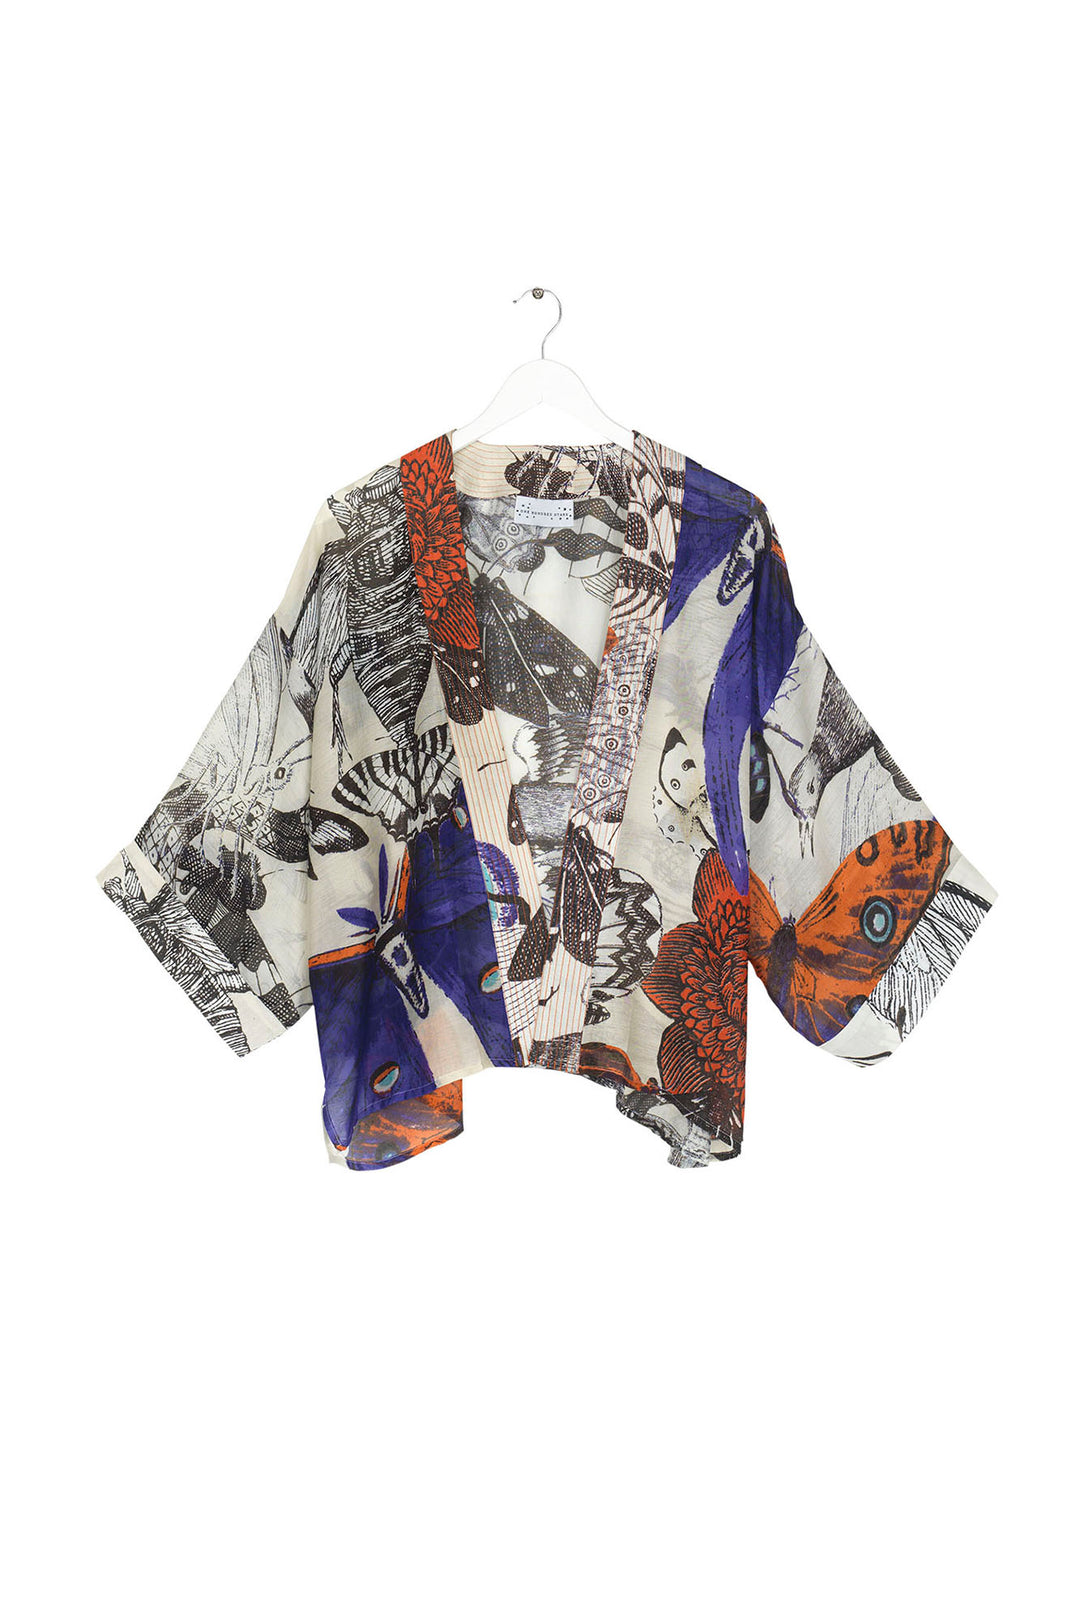 autumn winter ladies short kimono jacket with a butterfly and insect print on a cream background by One Hundred Stars